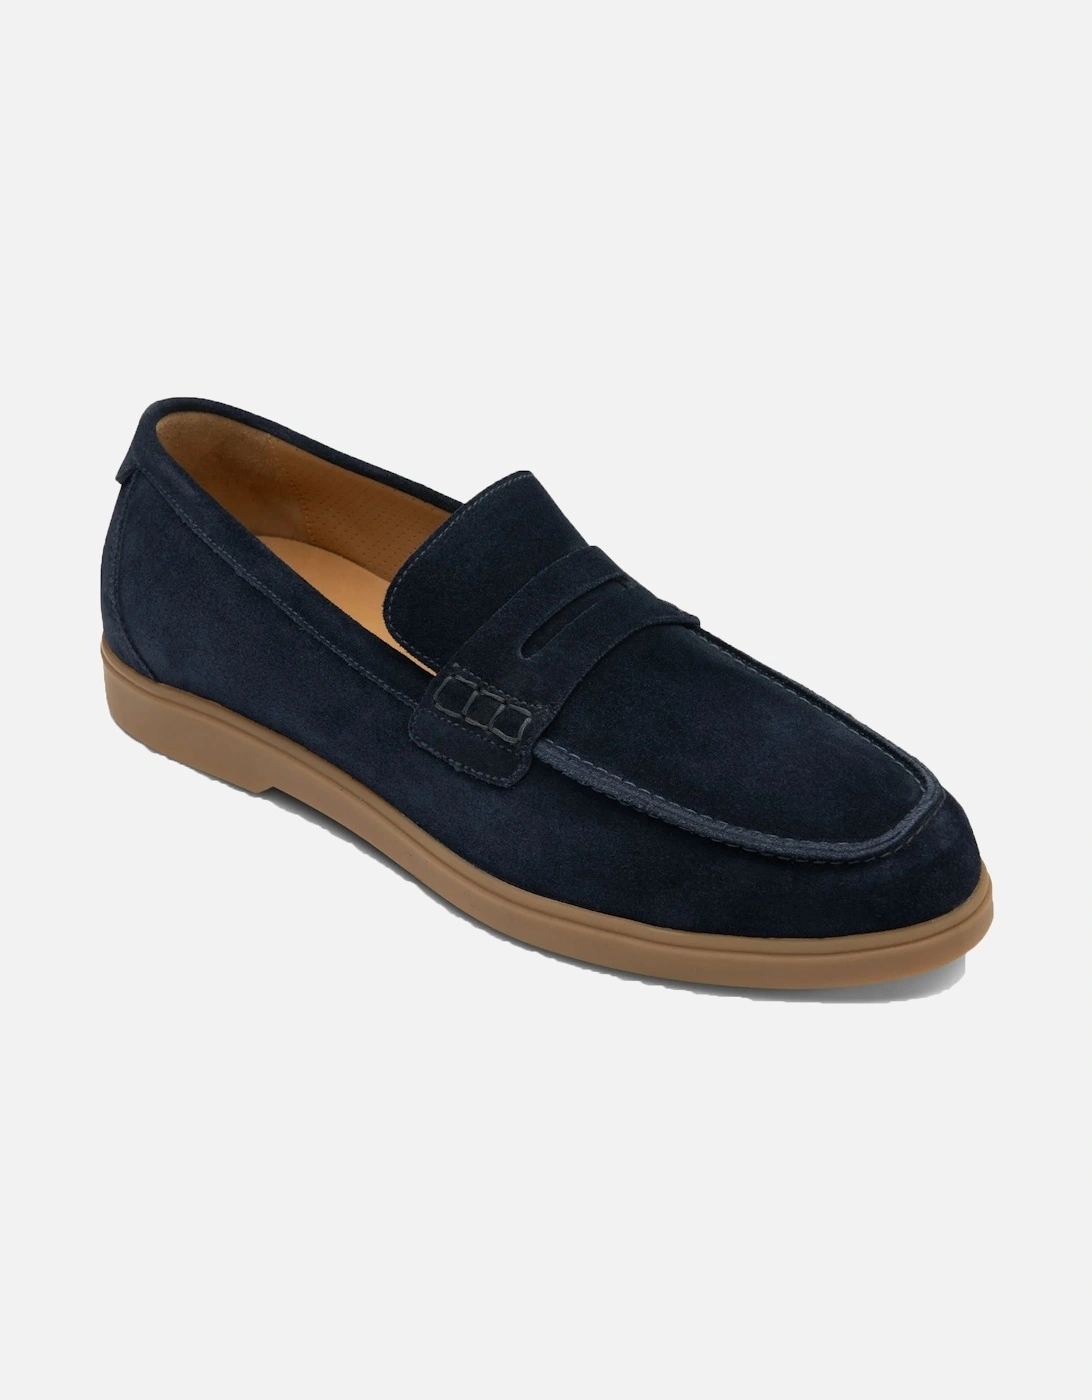 Lucca Navy Suede Loafer Navy